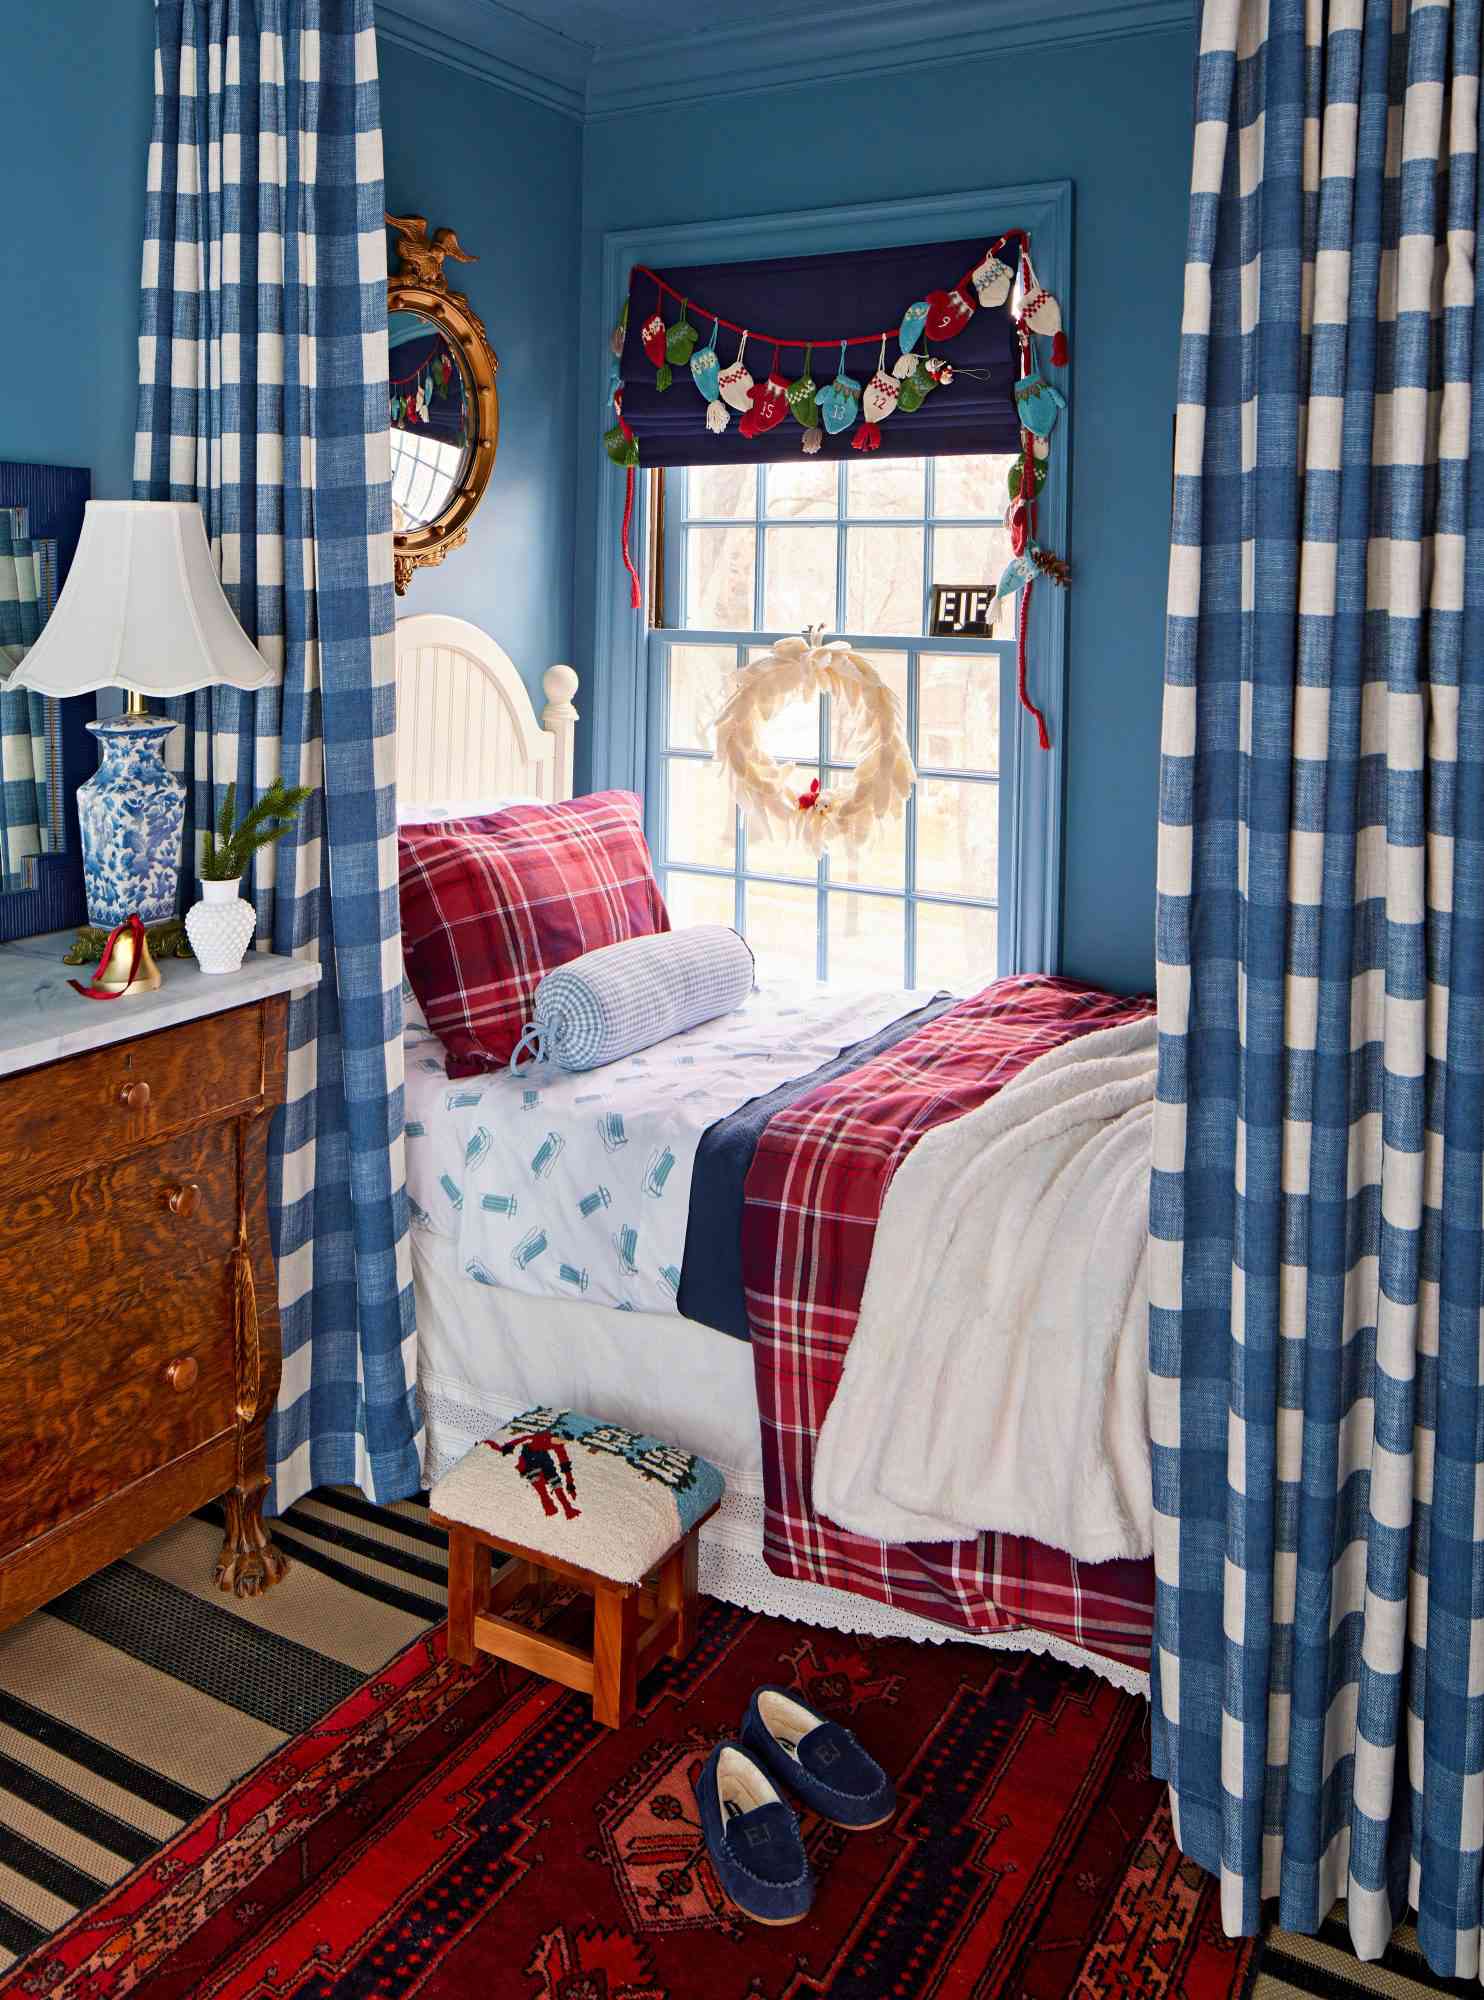 Garlands and blue plaid curtains surround a bedroom